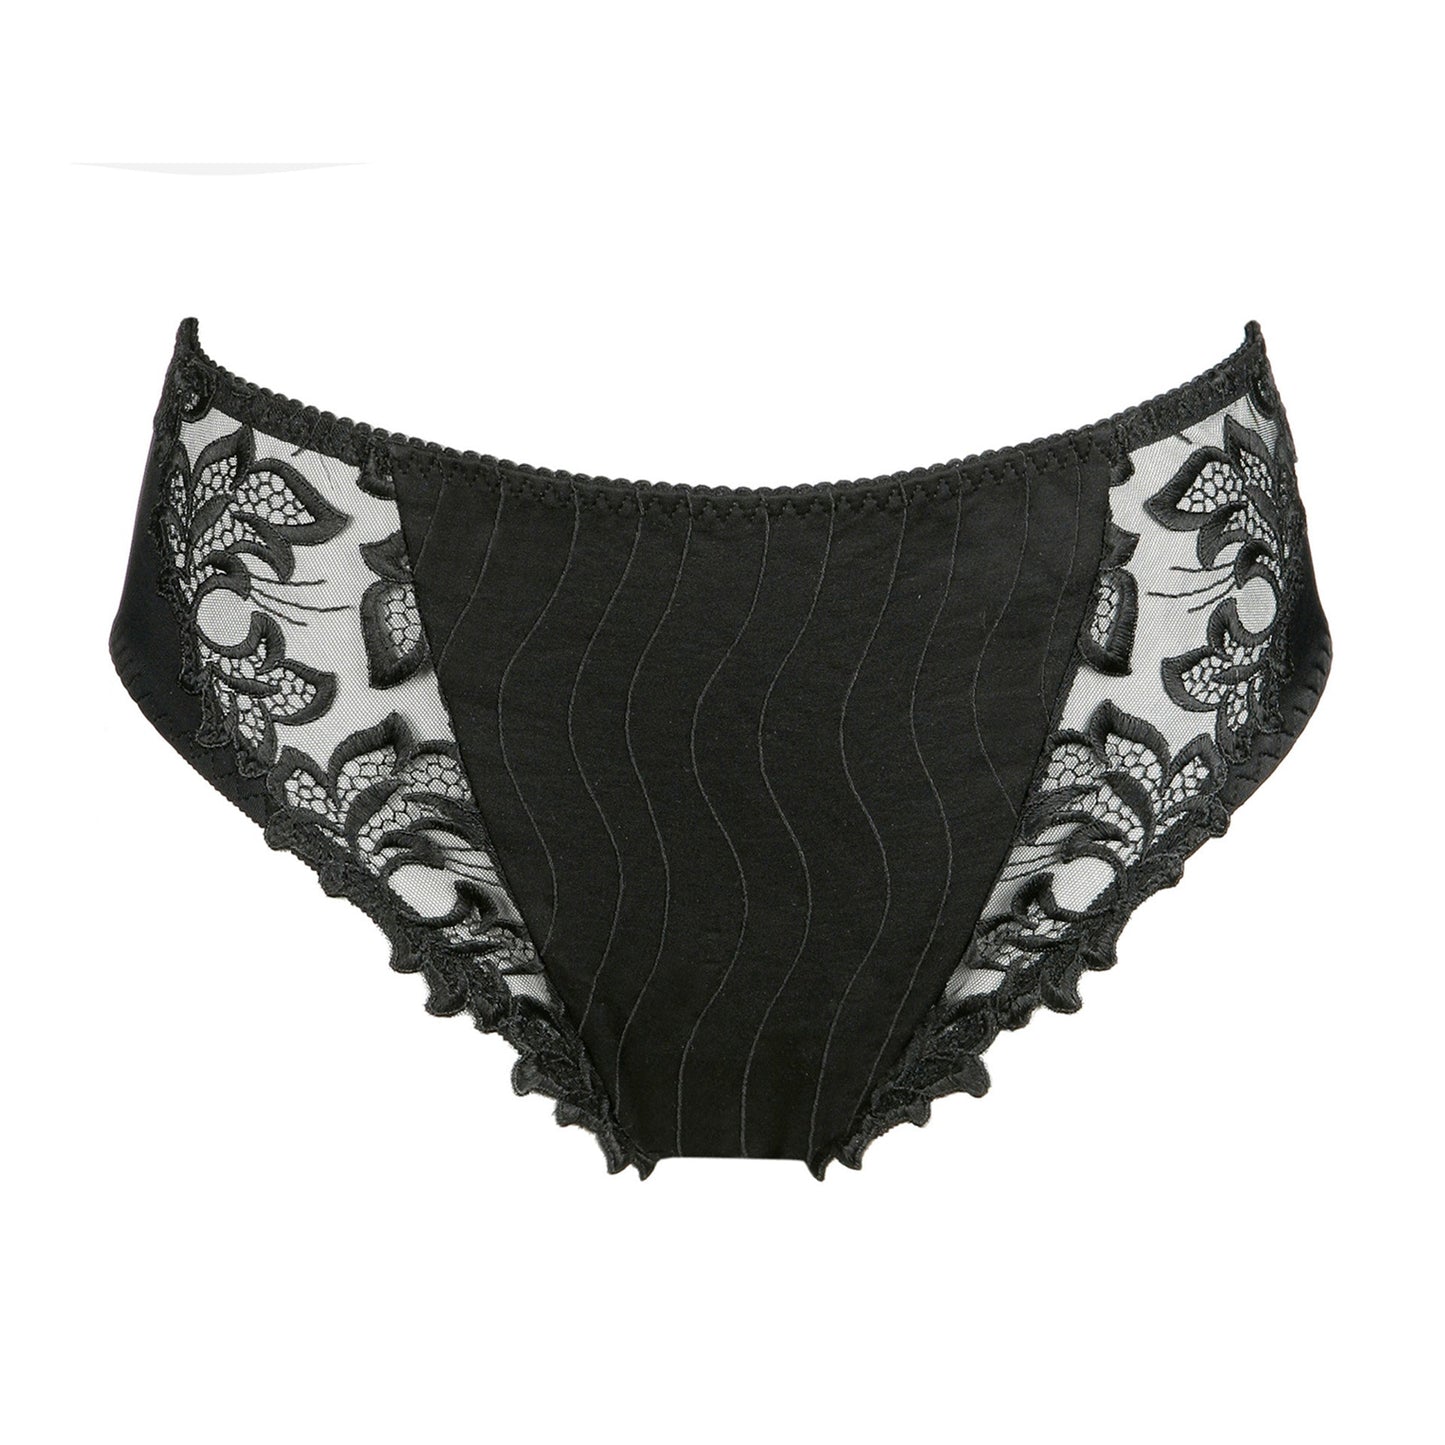 Deauville Full Brief Panty - Pinned Up Bra Lounge